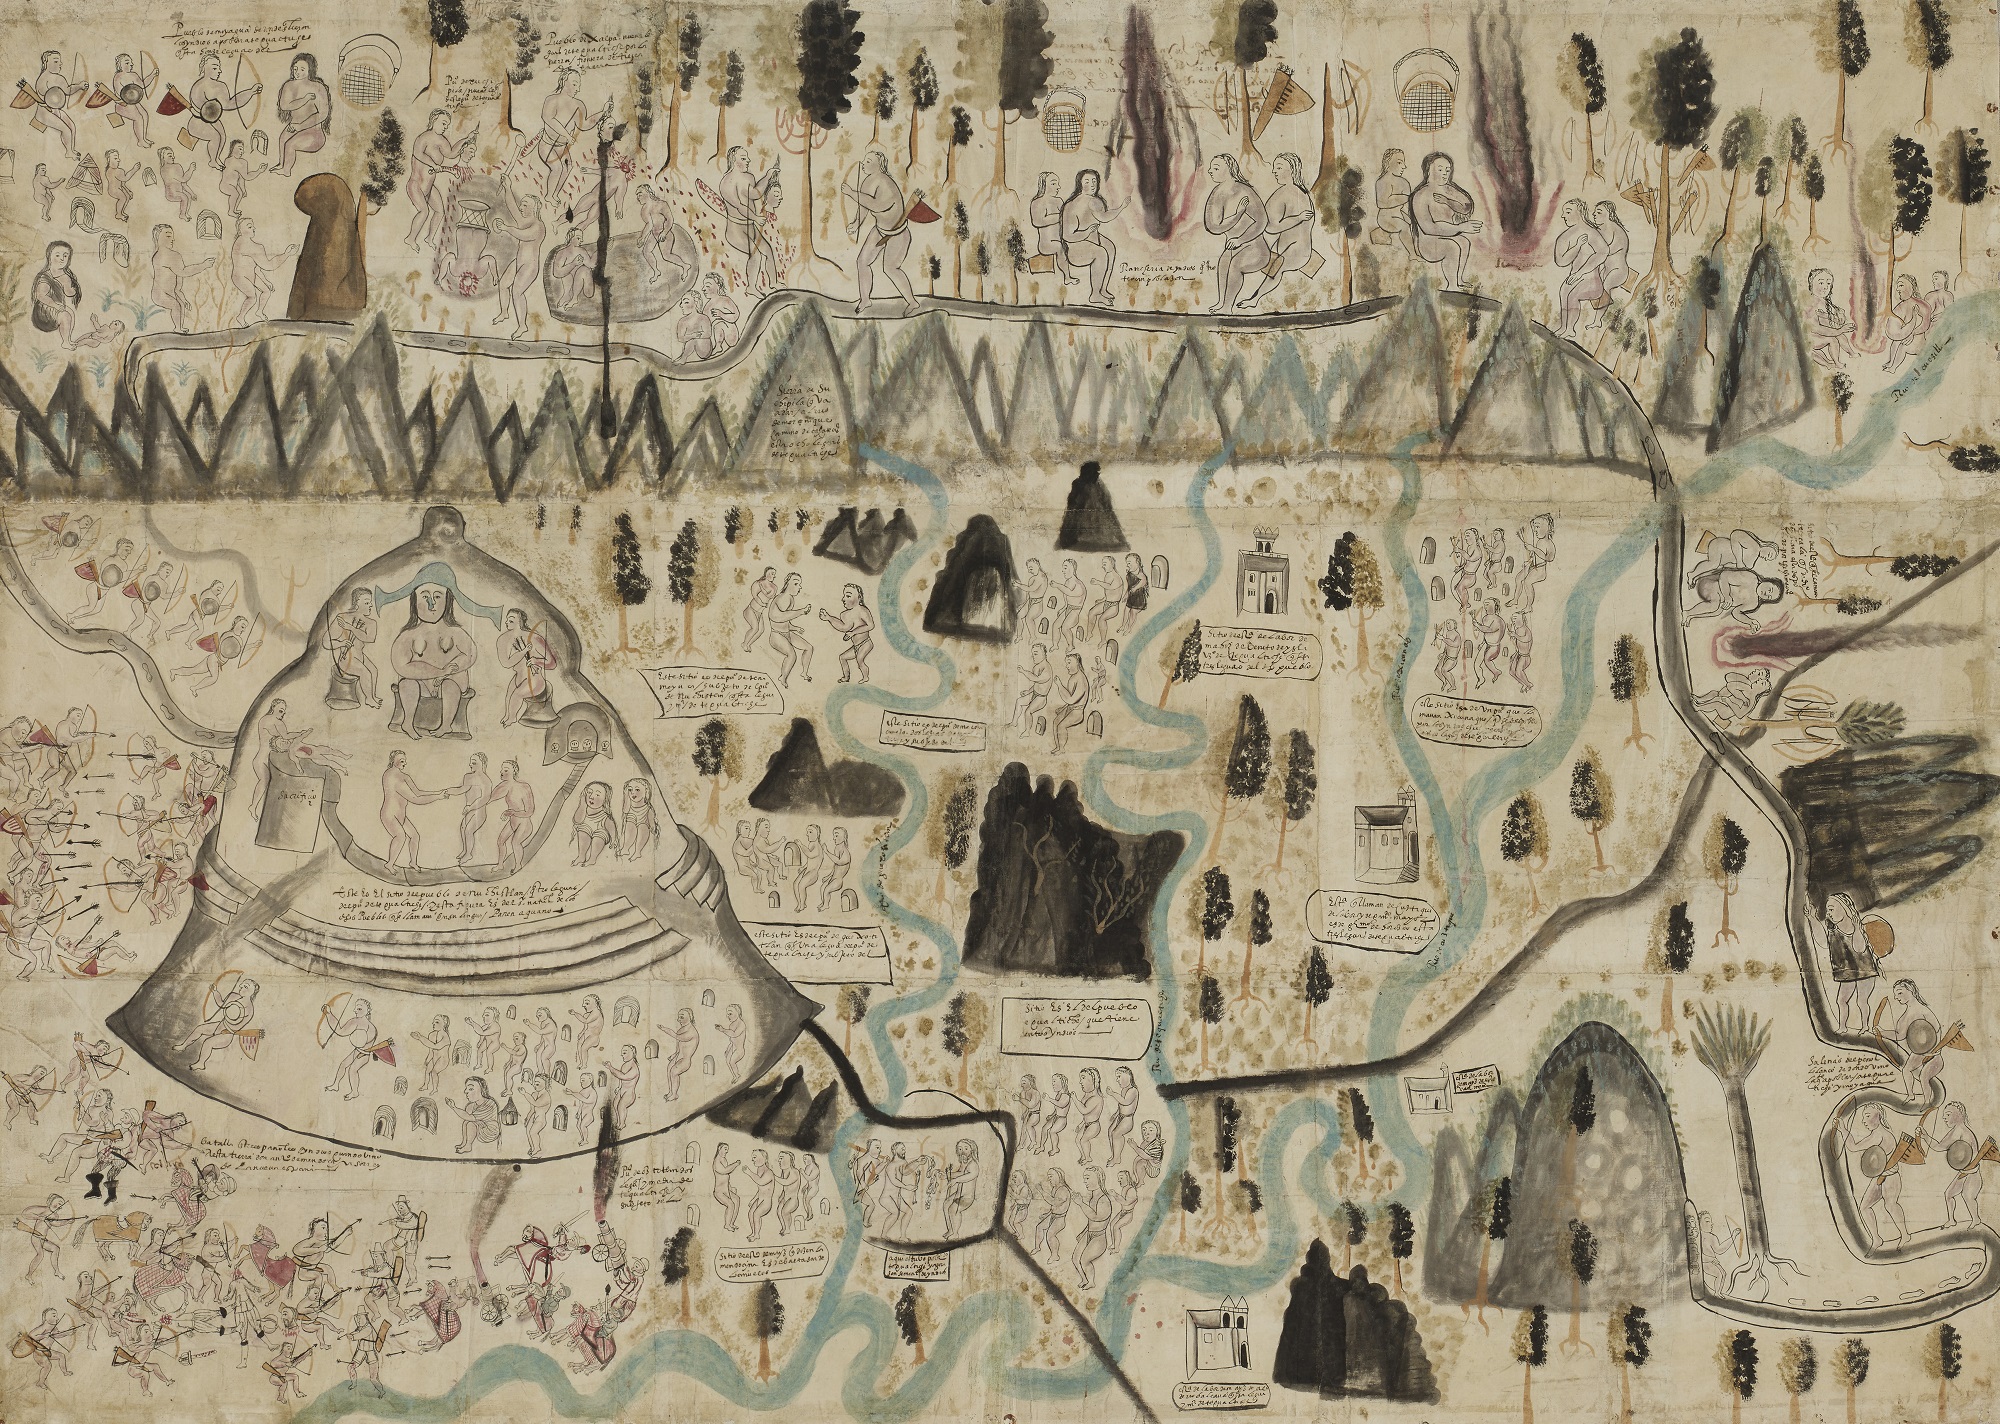 Map of Tequaltiche, Teocaltiche, Jalisco, Mexico, 1584 Watercolour and ink on paper, 86.3 x 124.5 cm On loan from The Hispanic Society of America, New York, NY